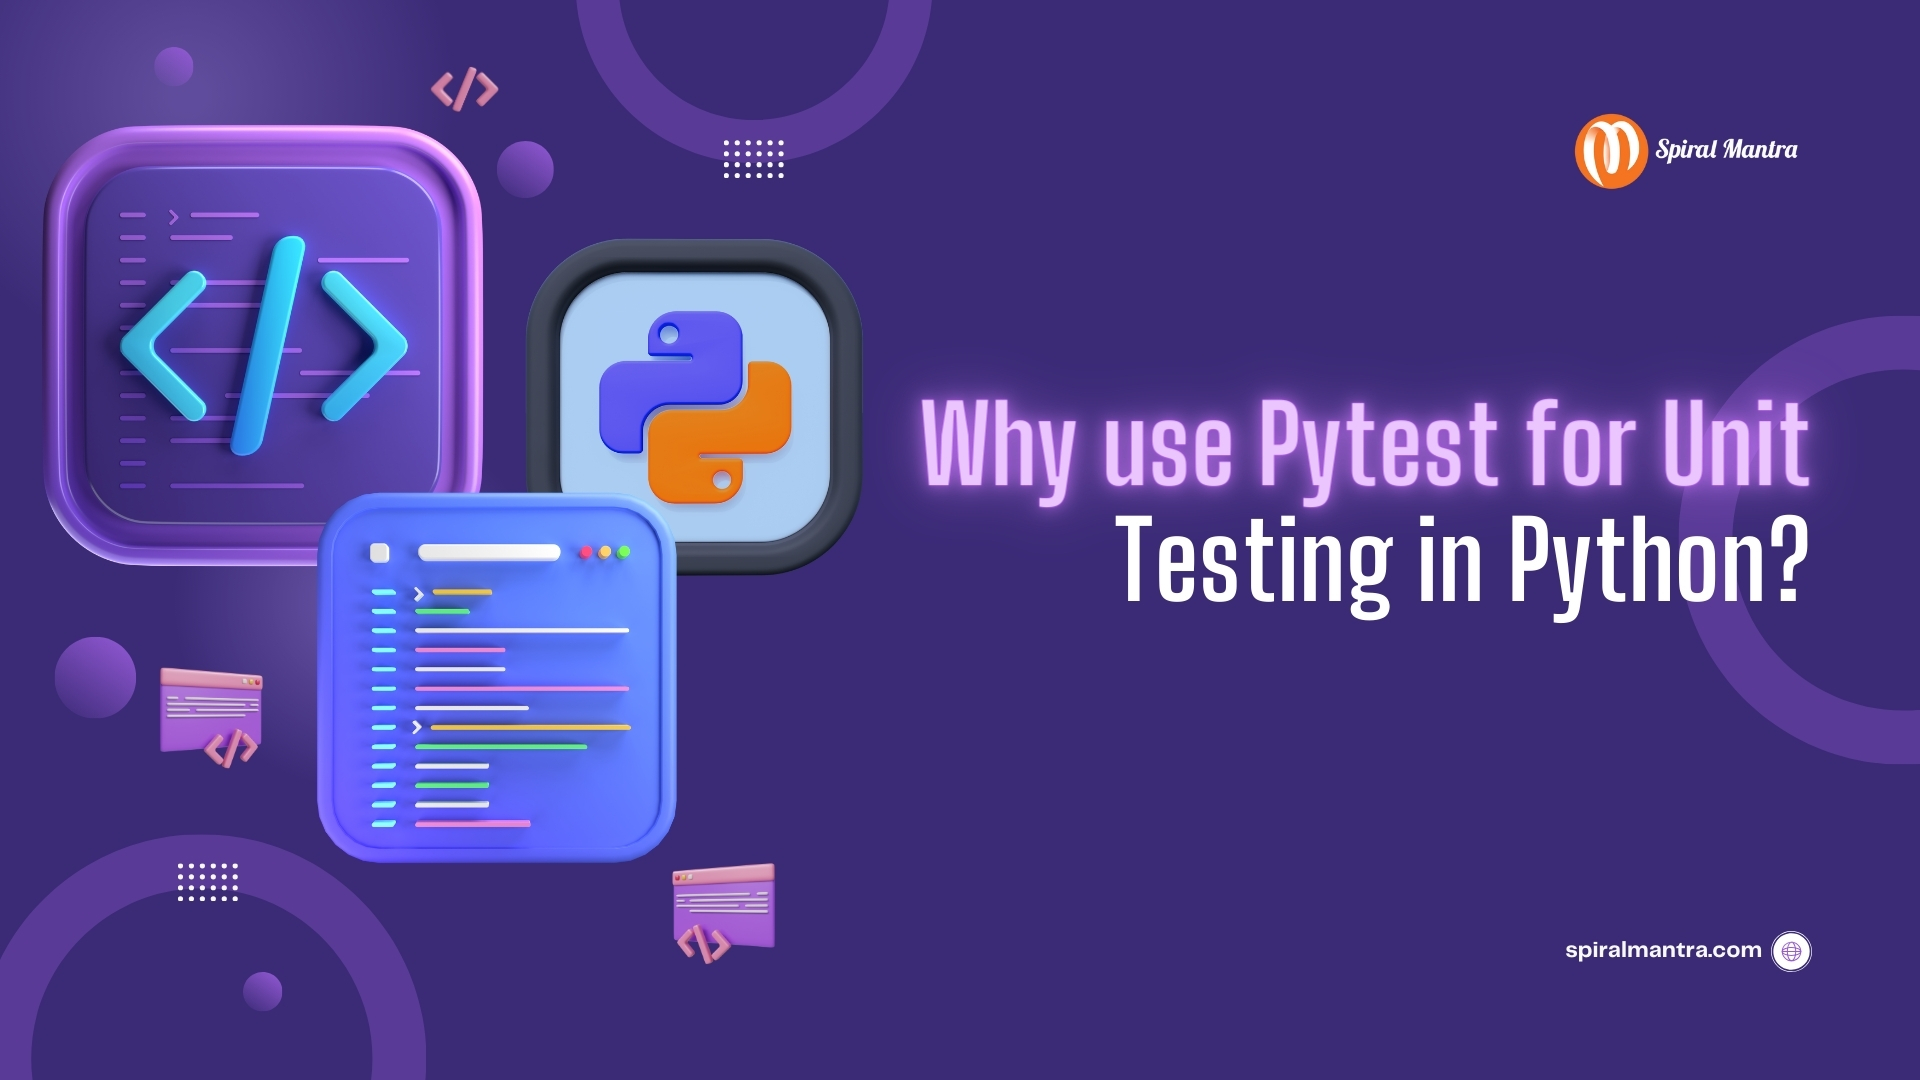 Why use Pytest for Unit Testing in Python?